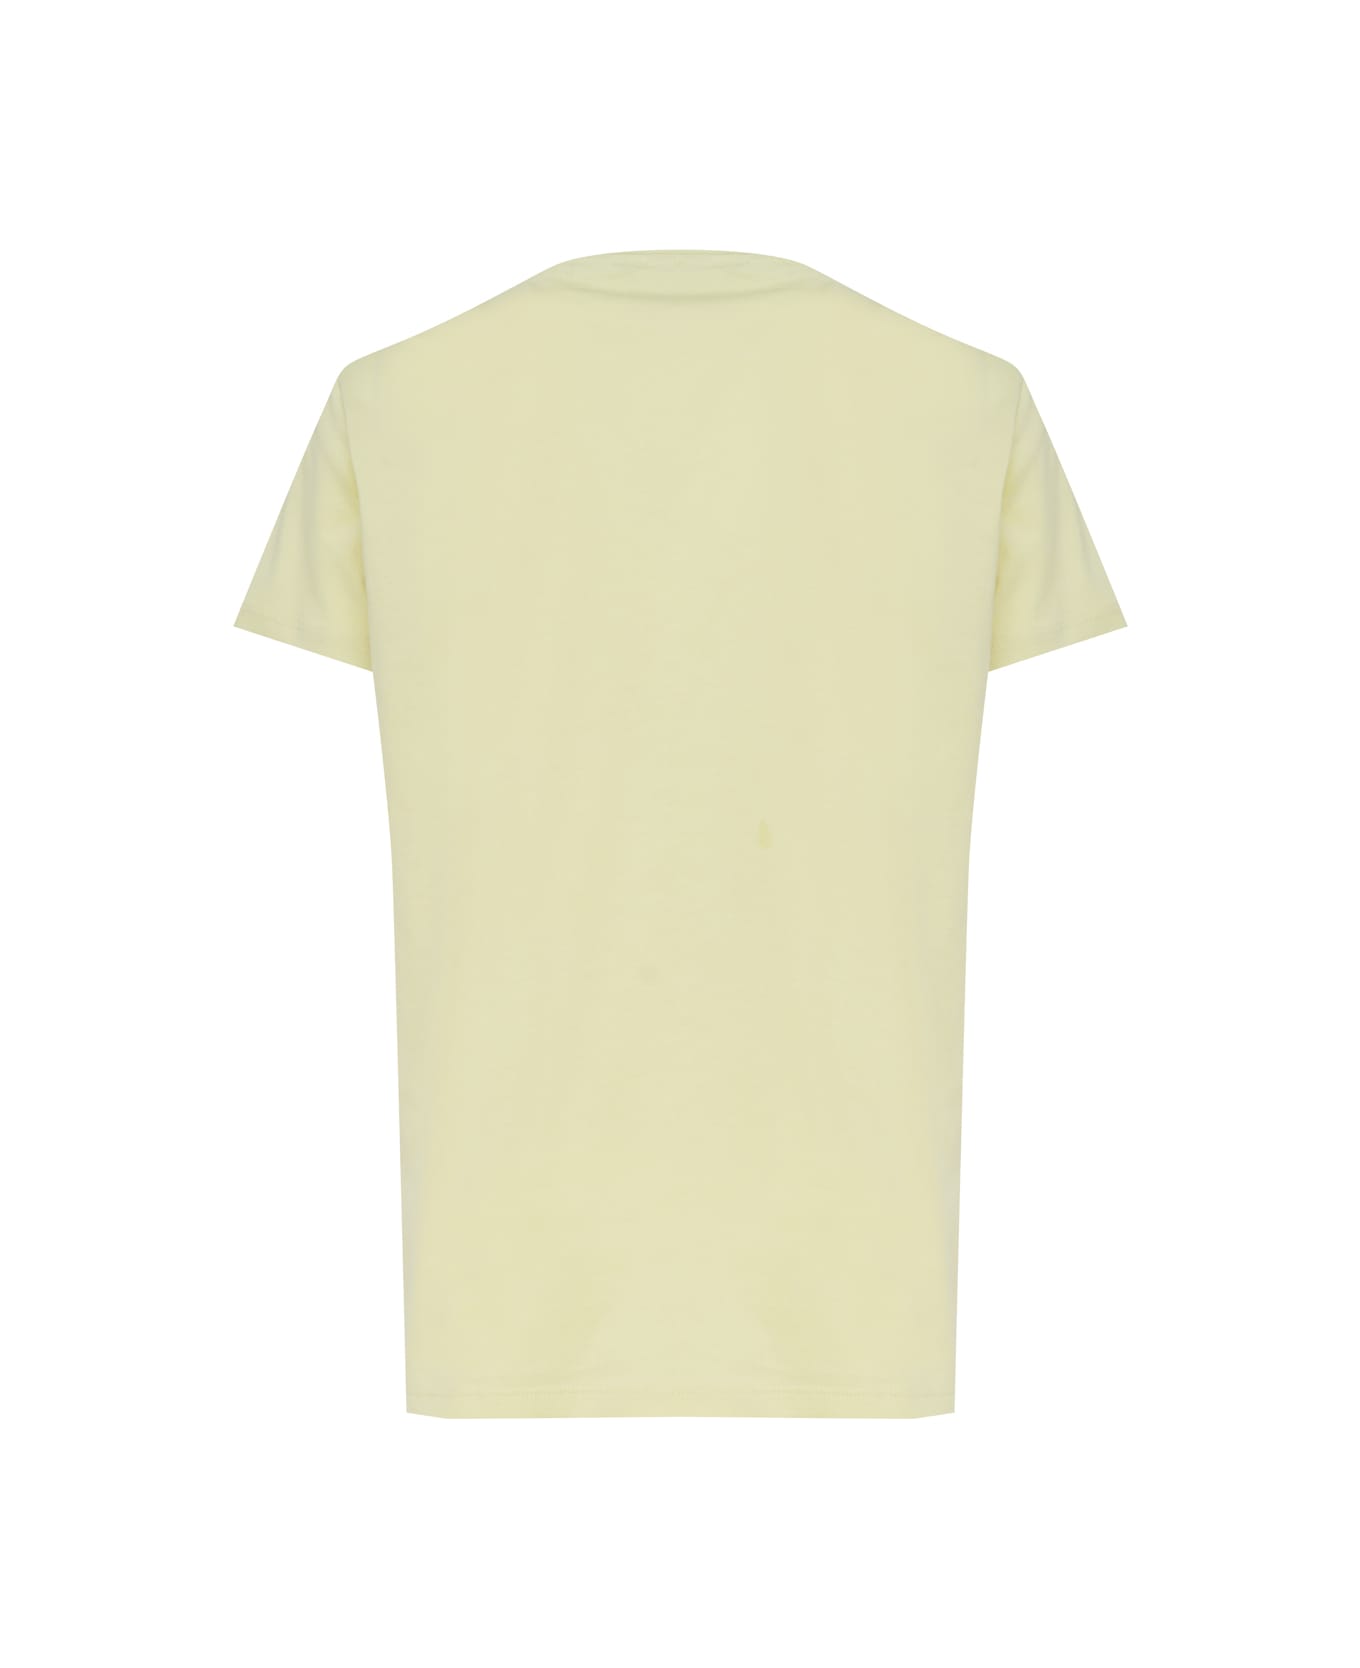 Pinko T-shirt With Logo Embroidery - Yellow